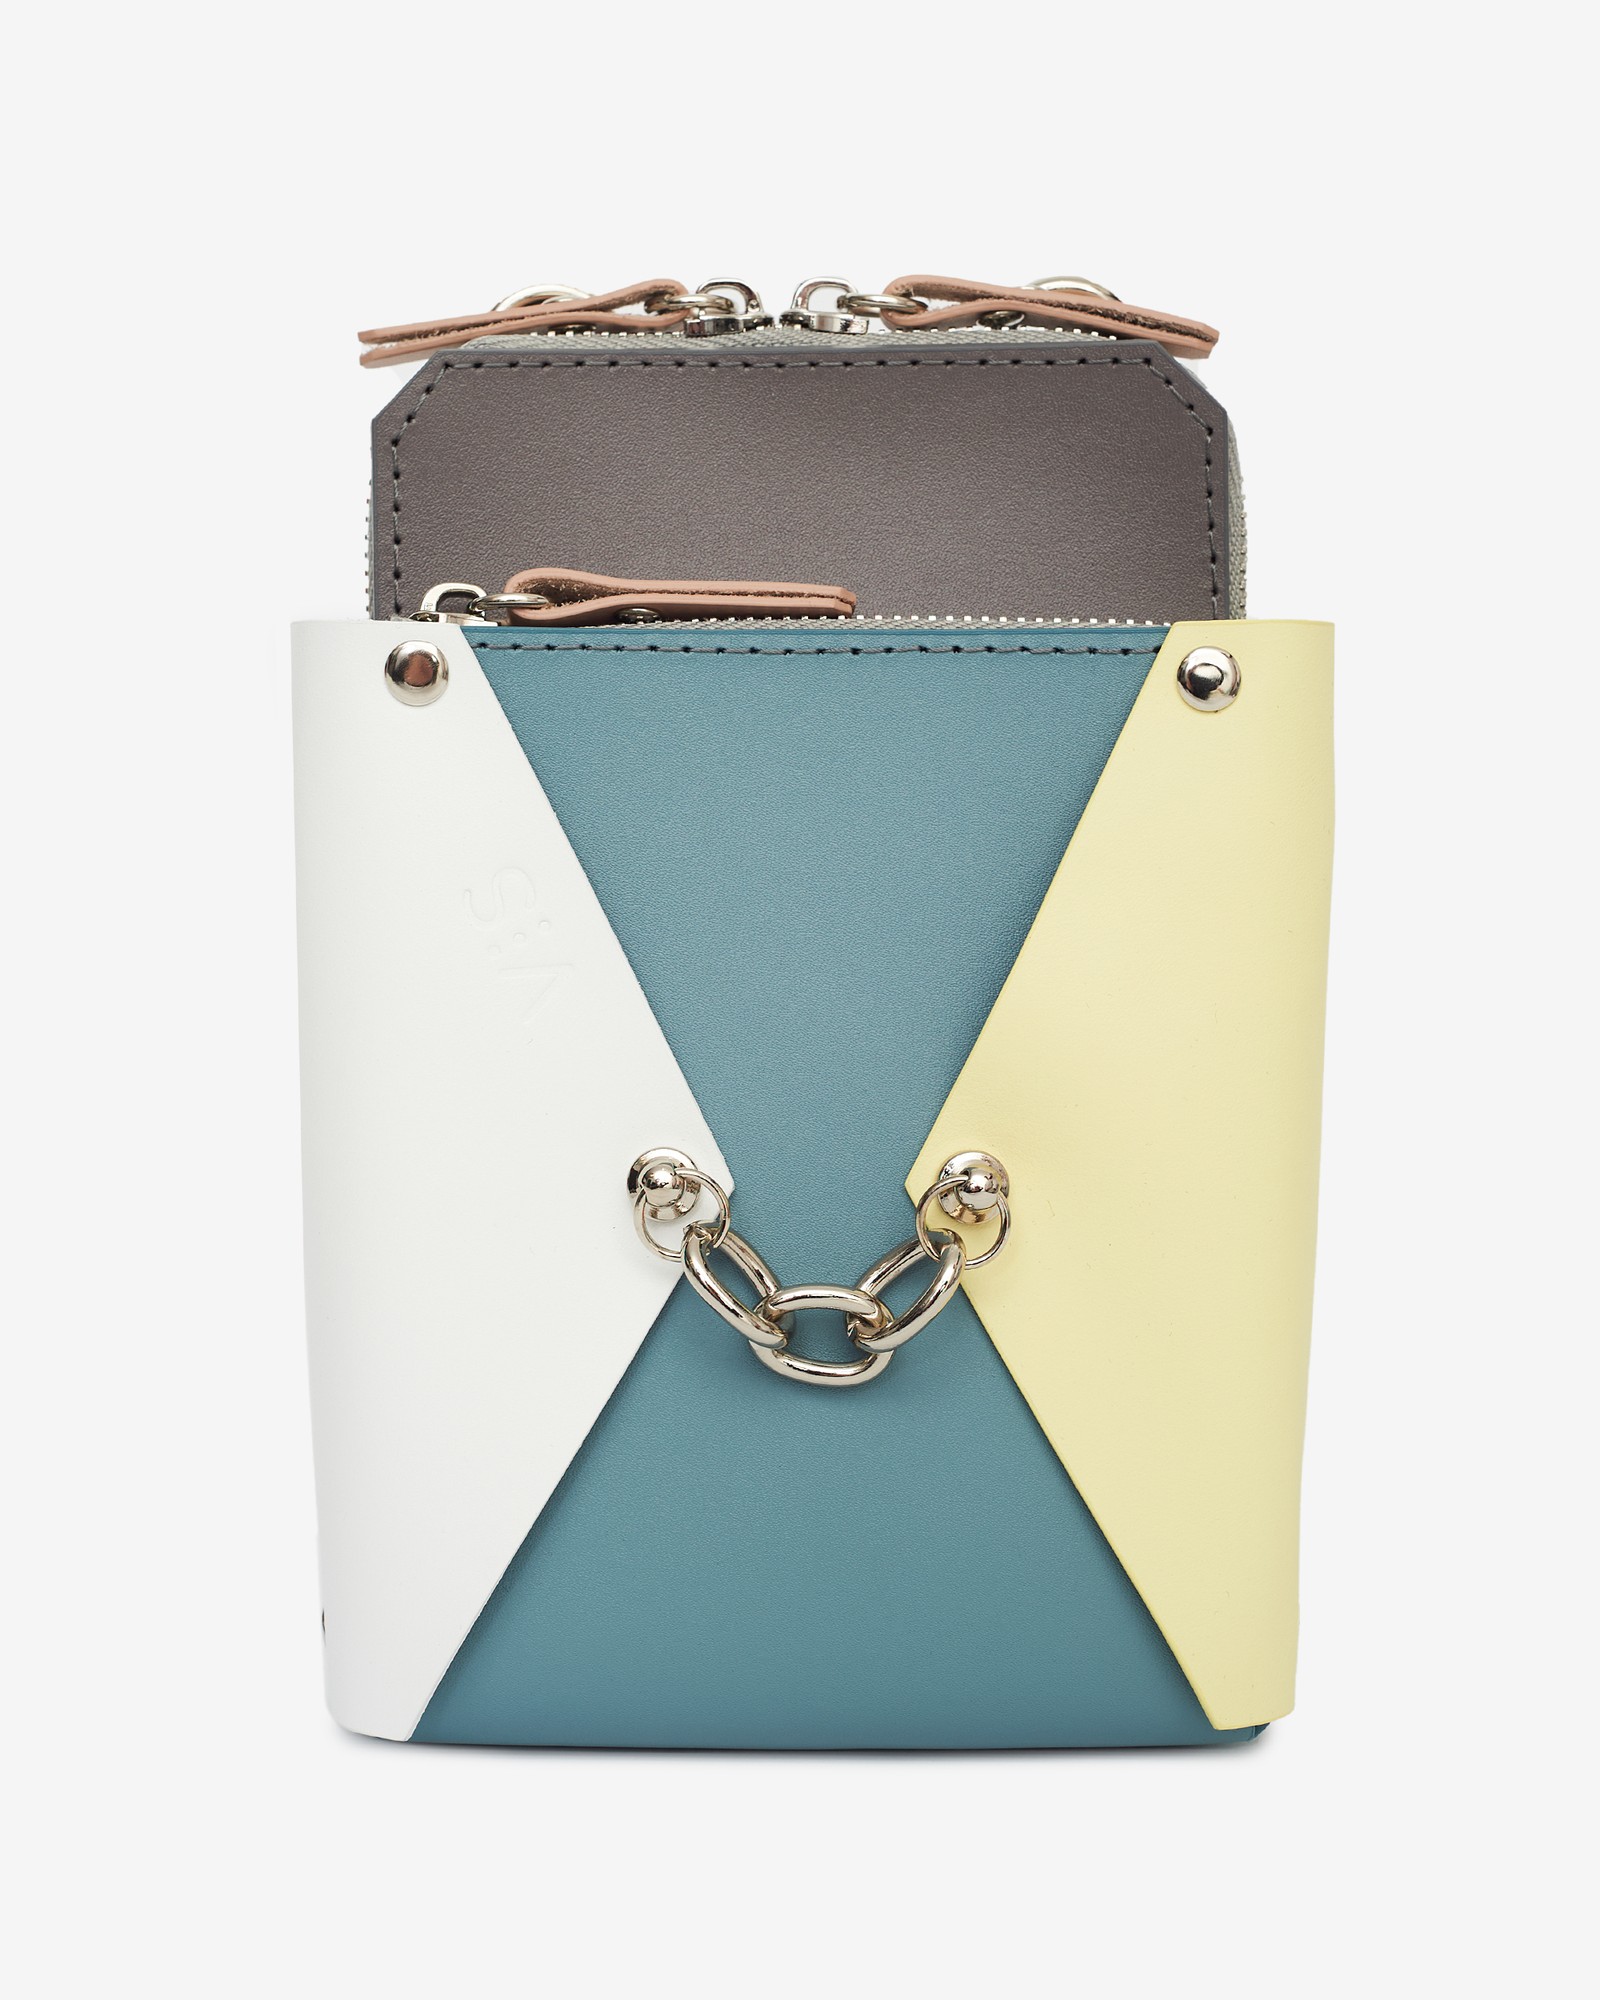 Talia leather bag in grey, white, blue and pink color